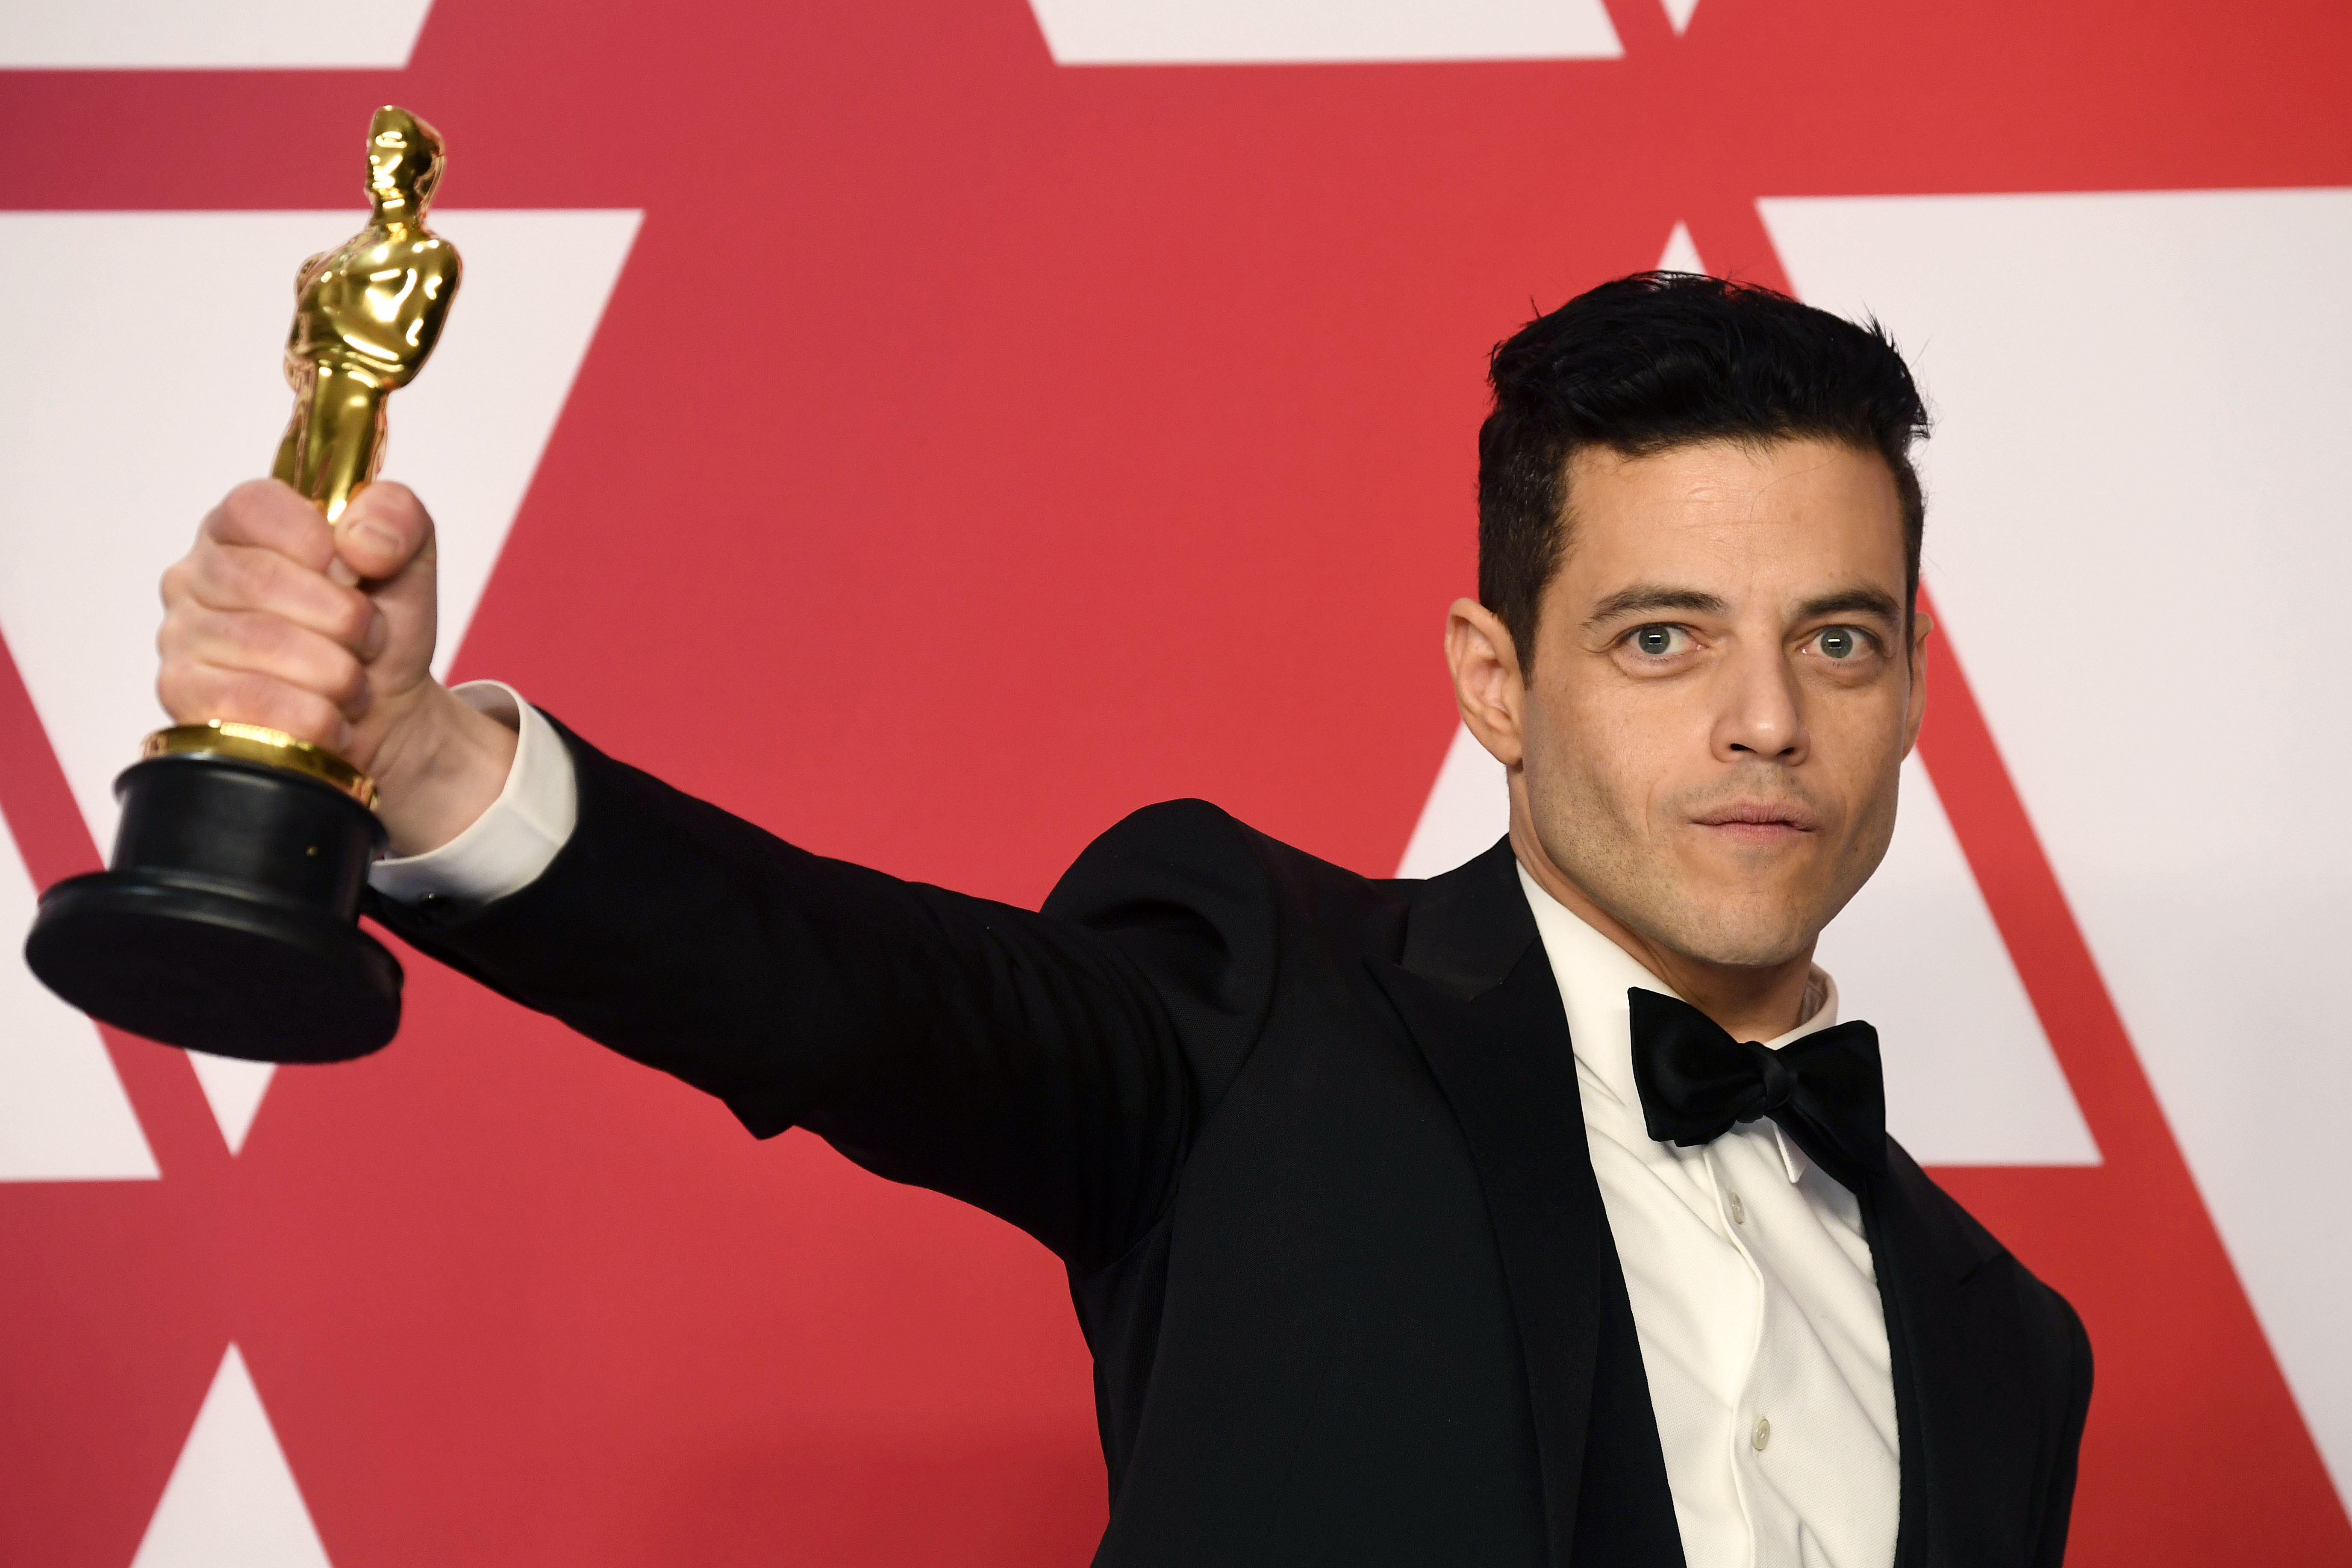 Rami Malek, star of No Time to Die, holds up his Oscar award